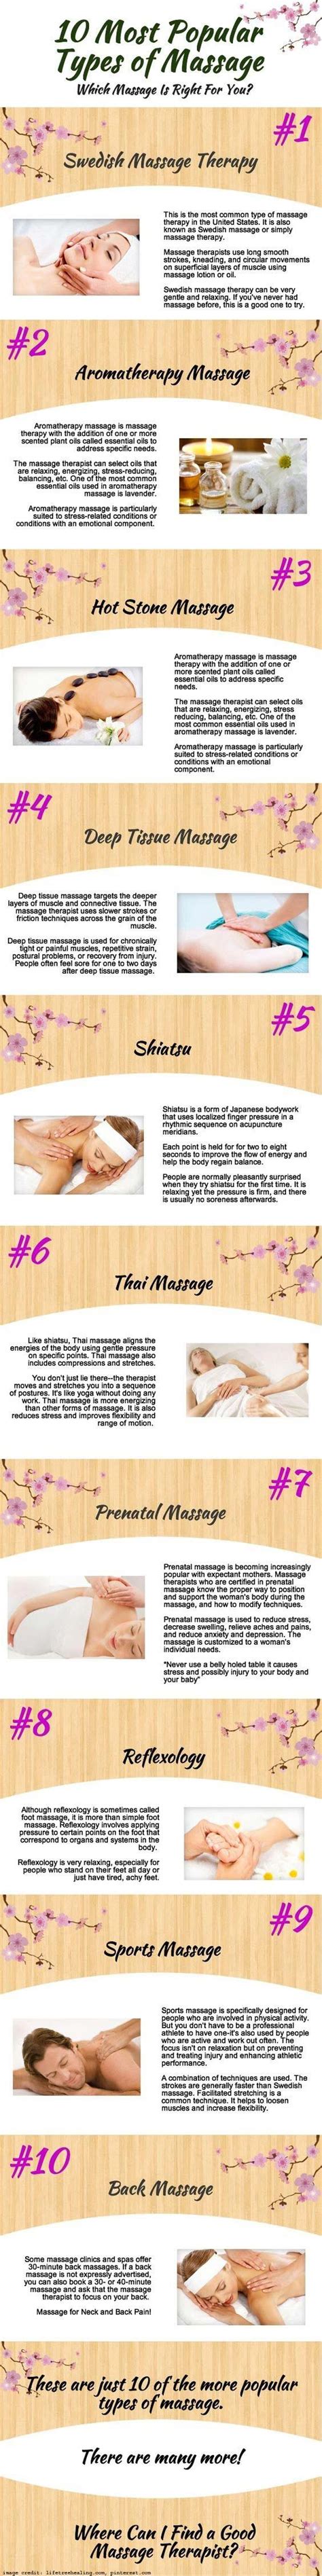 types of massages and their overall health benefits